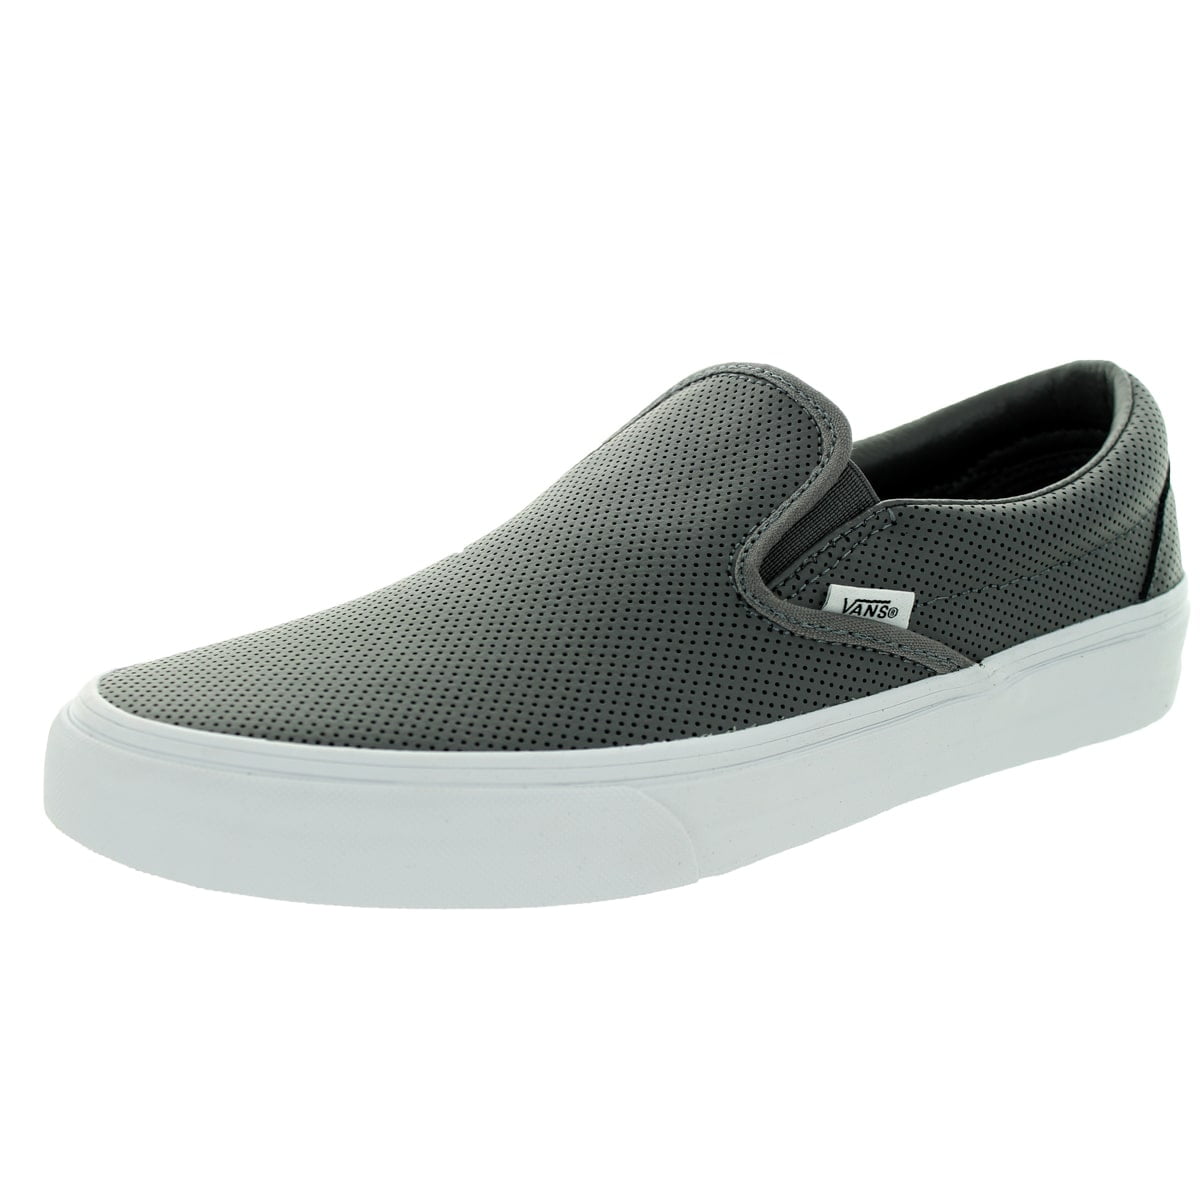 Vans - Vans Unisex Classic Slip-On Perforated Leather Smoked Peark ...